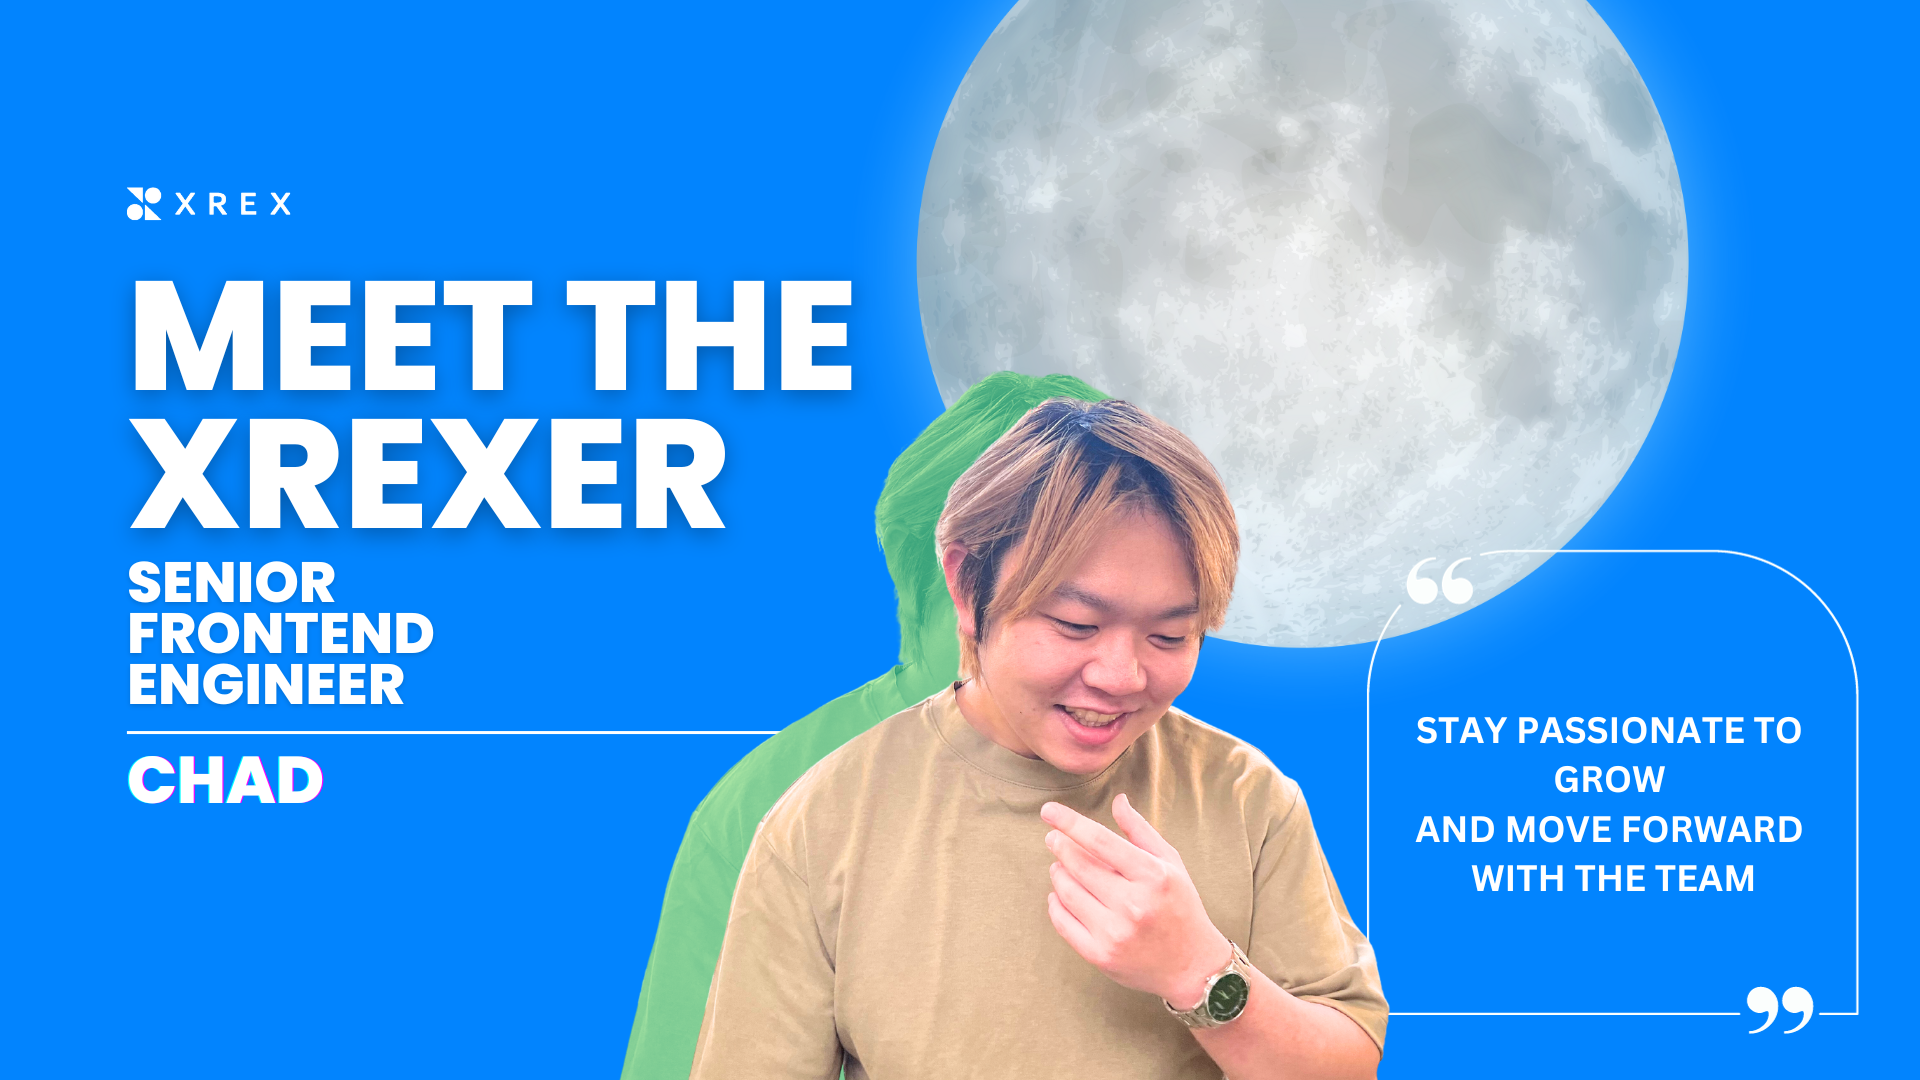 XREXer 特寫：Chad Zhuang, Senior Frontend Engineer